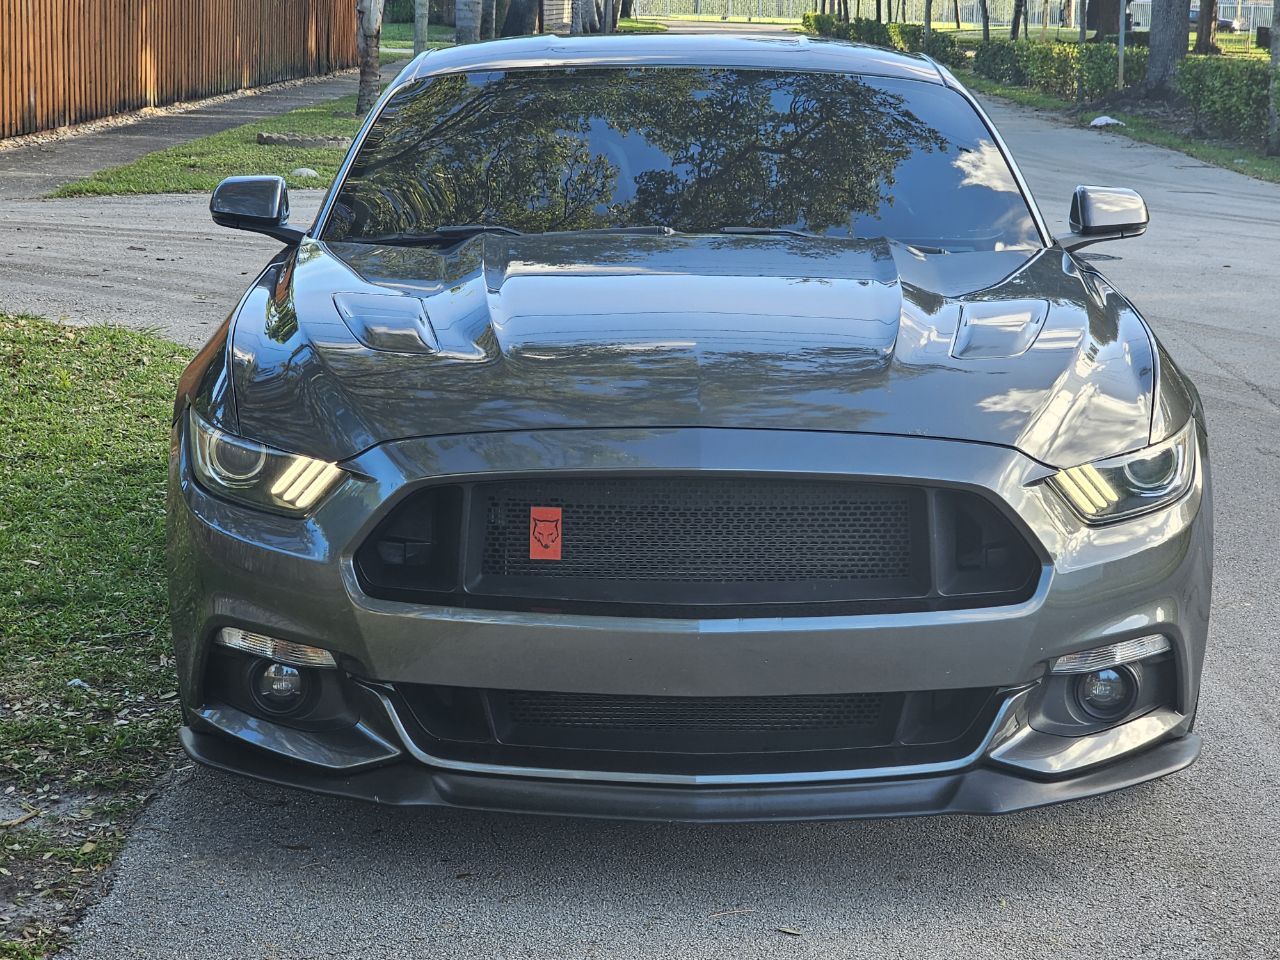 2015 FORD Mustang Coupe - $21,025